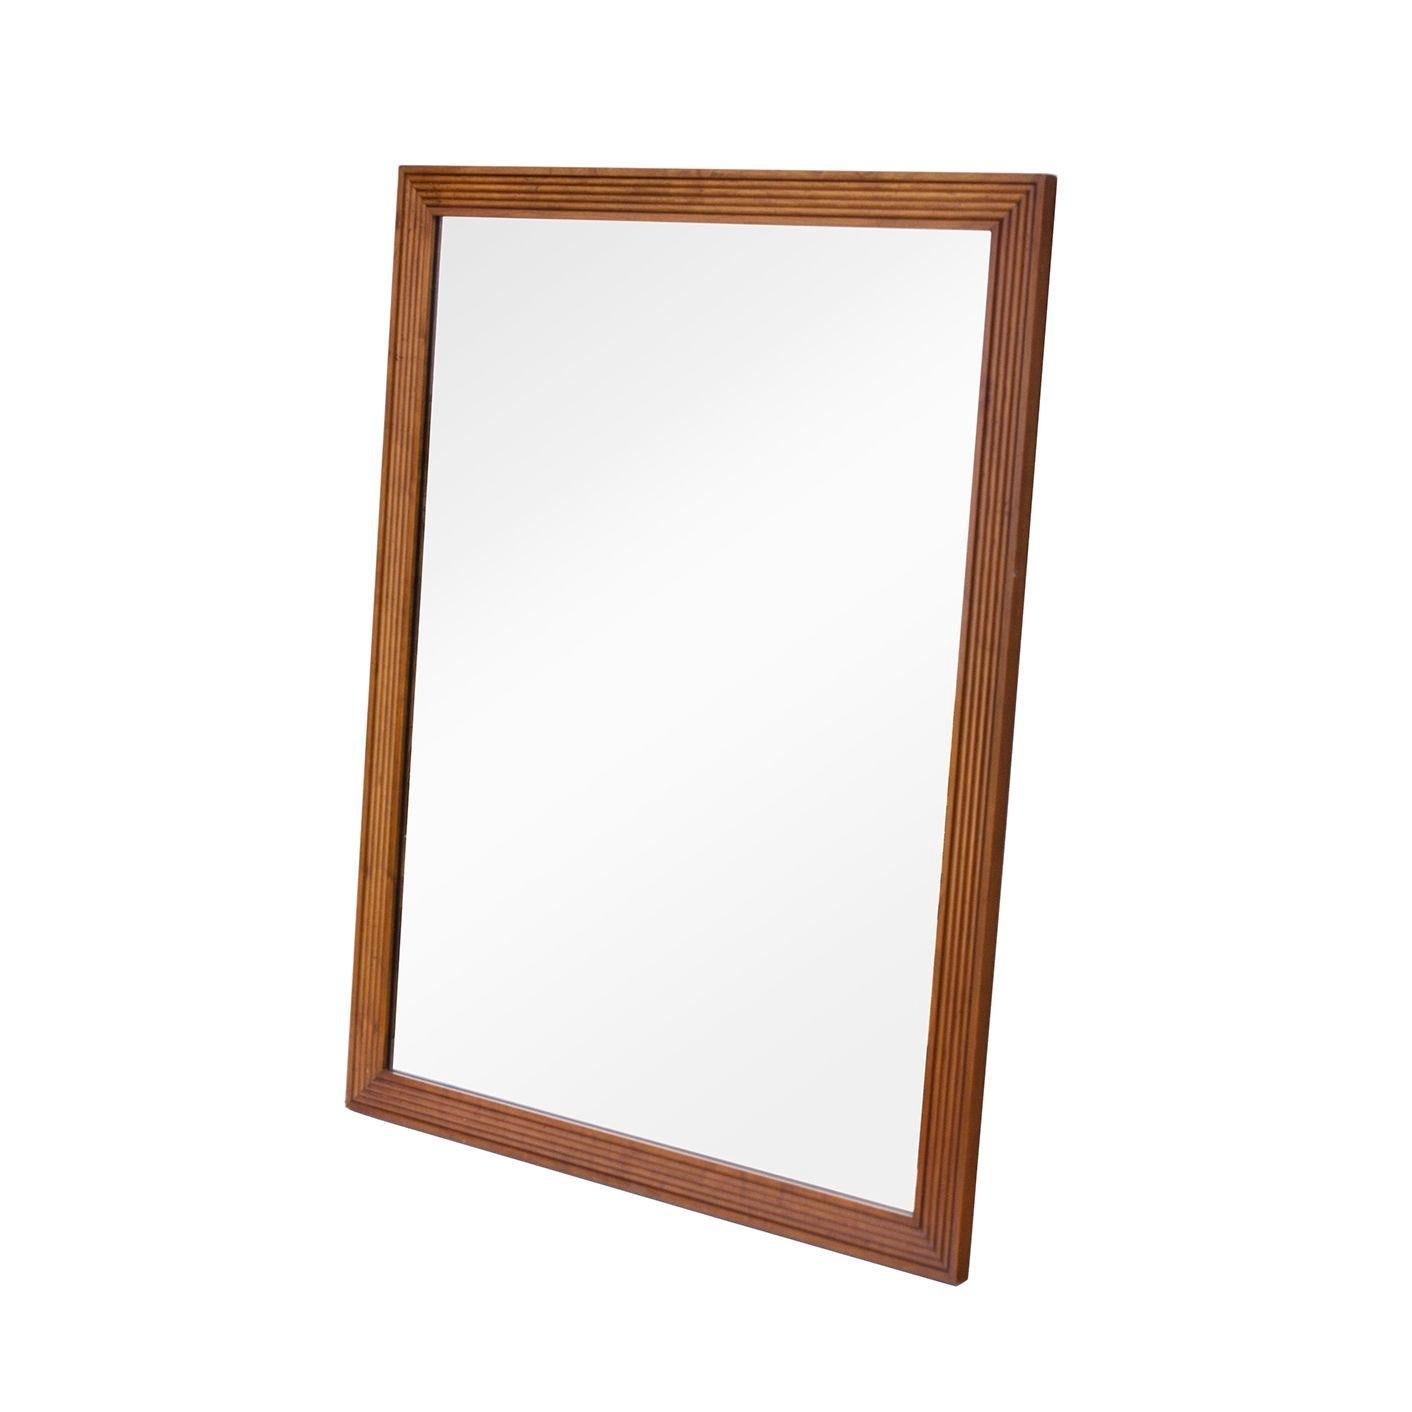 Late 20th Century Baker Furniture Milling Road Stepped or Beveled Walnut Mirror For Sale